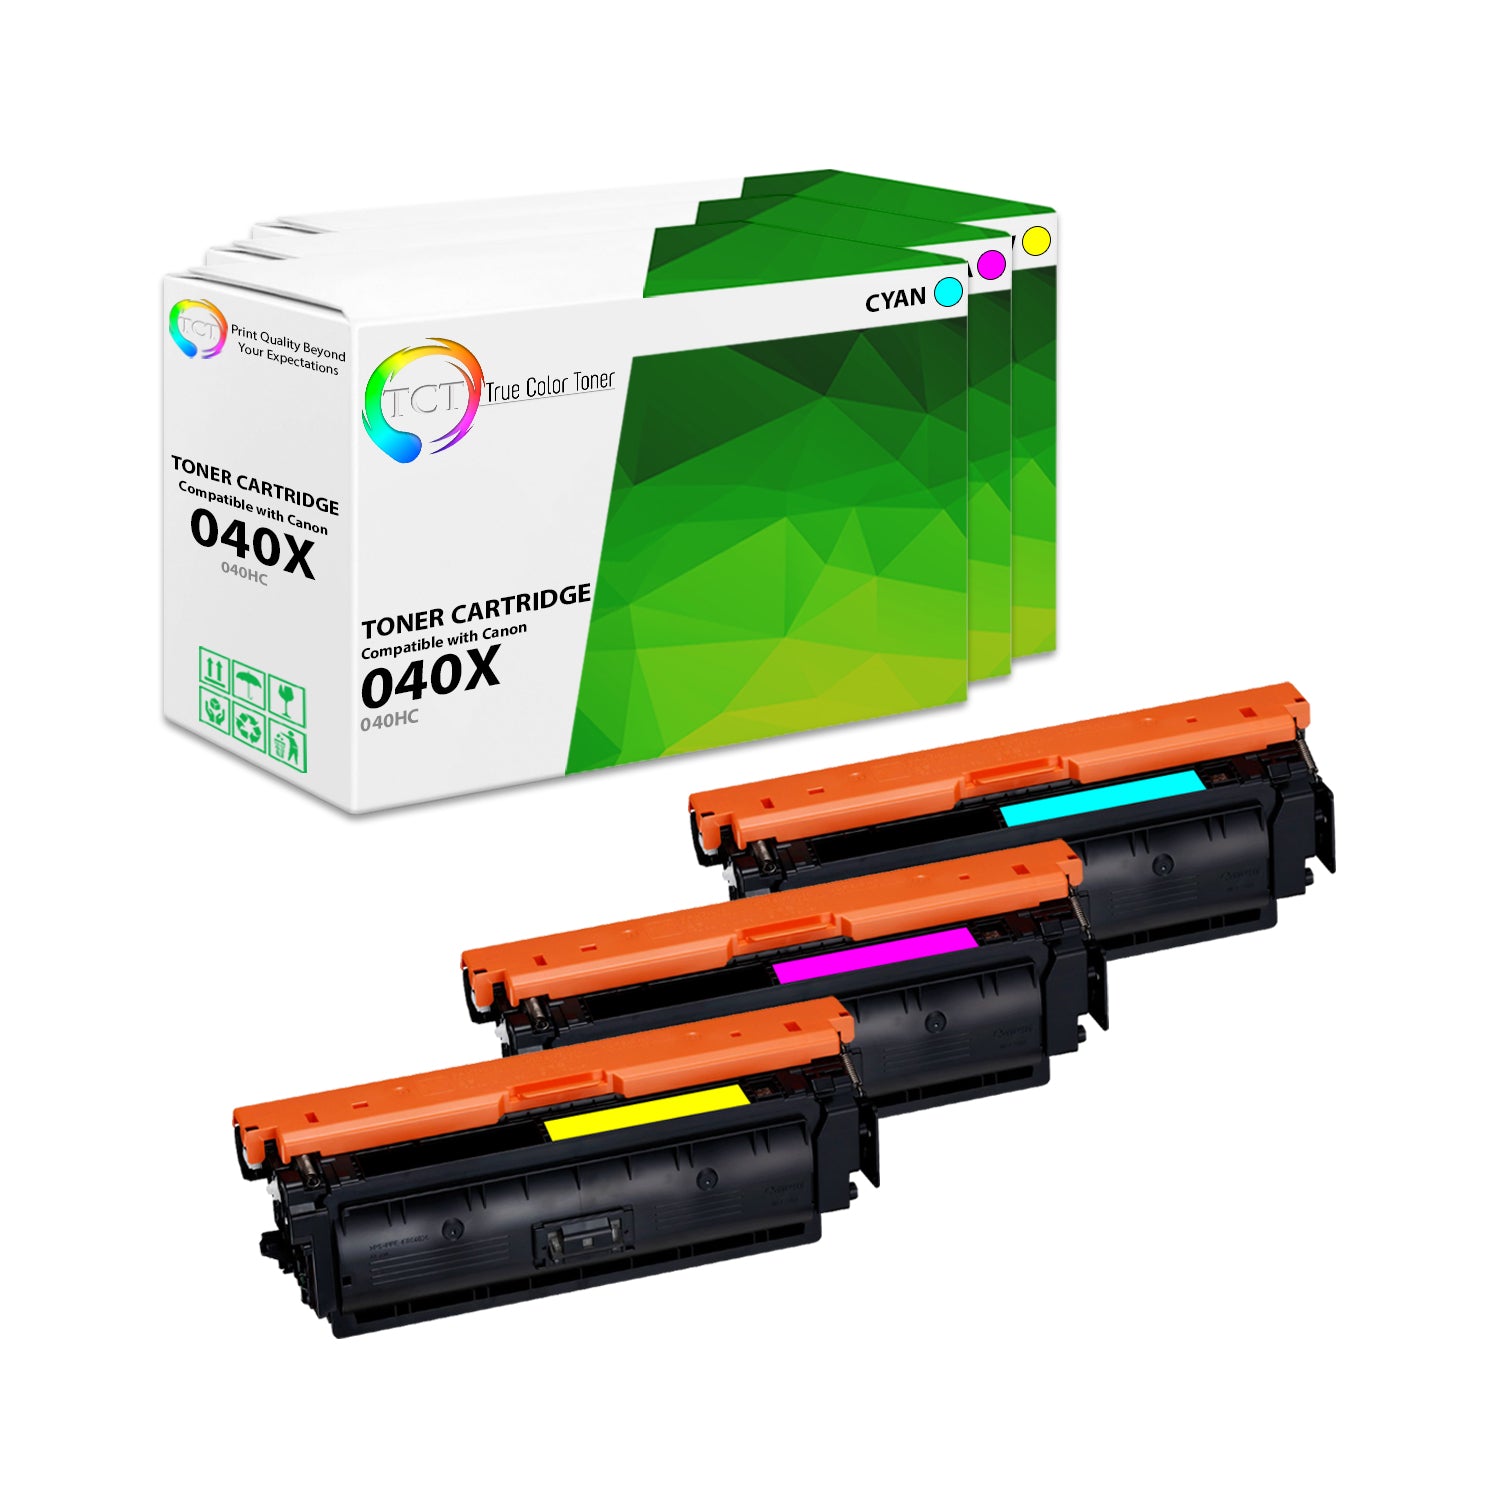 TCT Compatible High Yield Toner Cartridge Replacement for the Canon 040 Series - 3 Pack (C, M, Y)